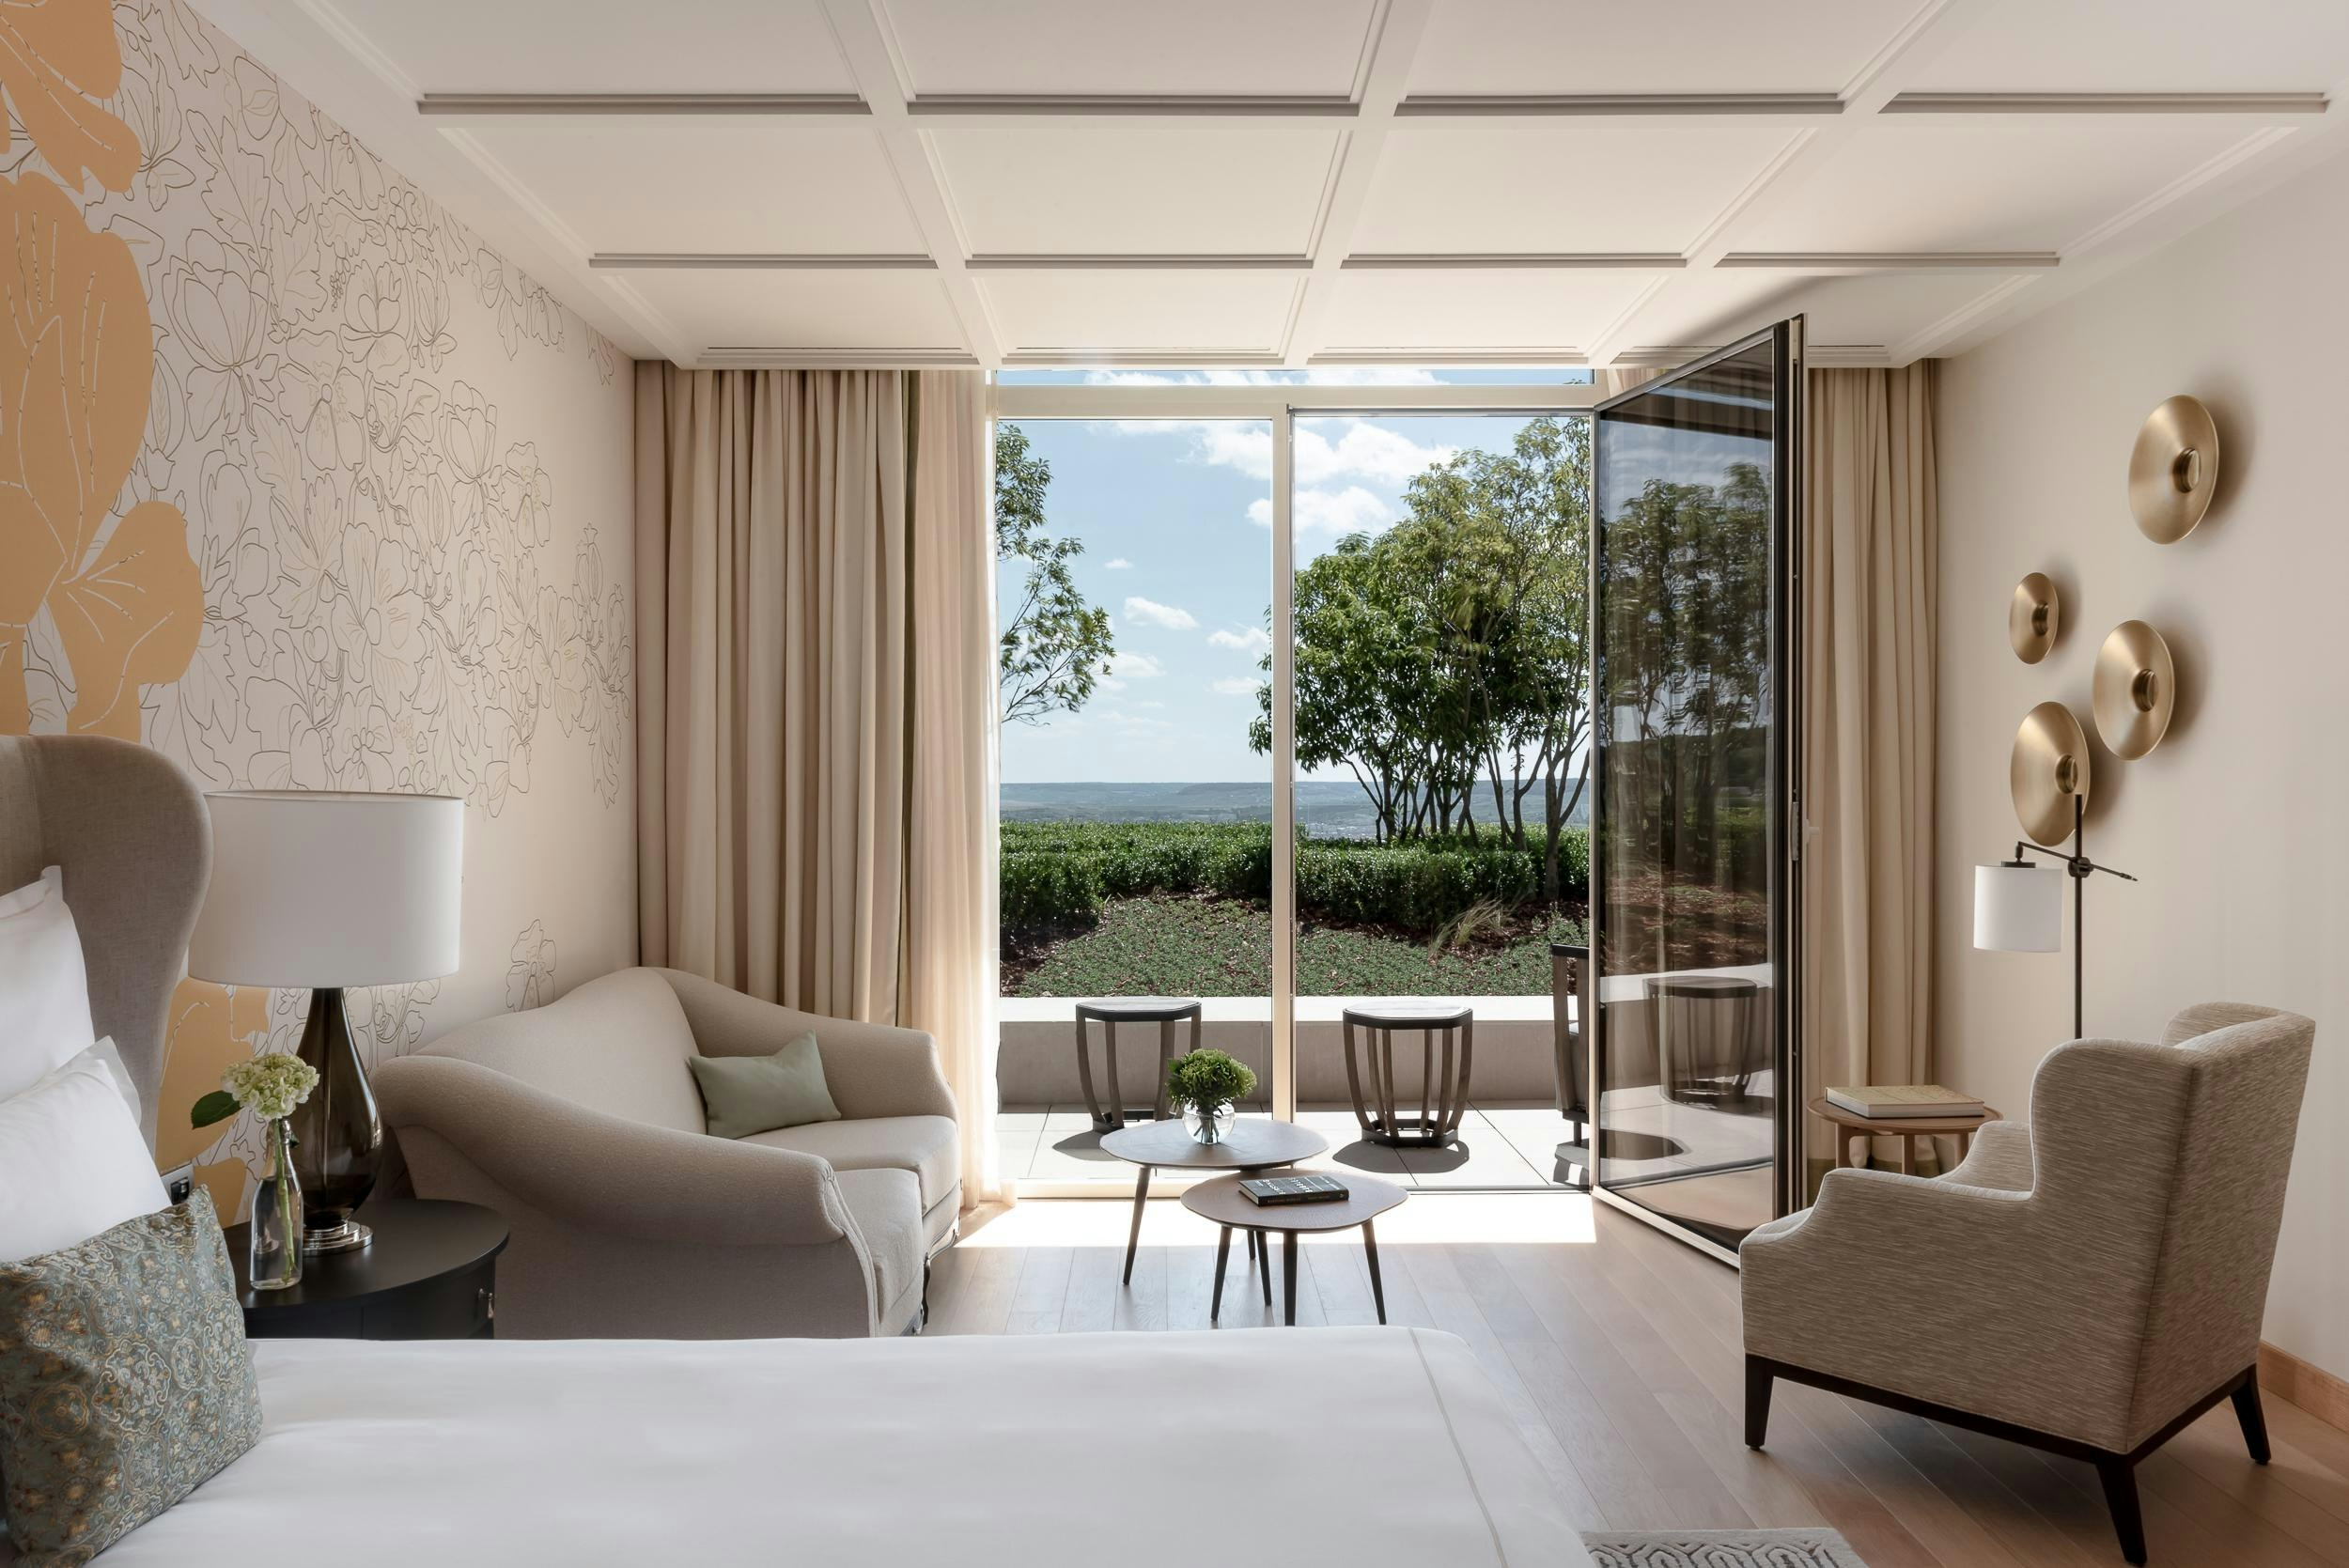 Luxurious hotel room with a balcony and view of vineyards.jpg